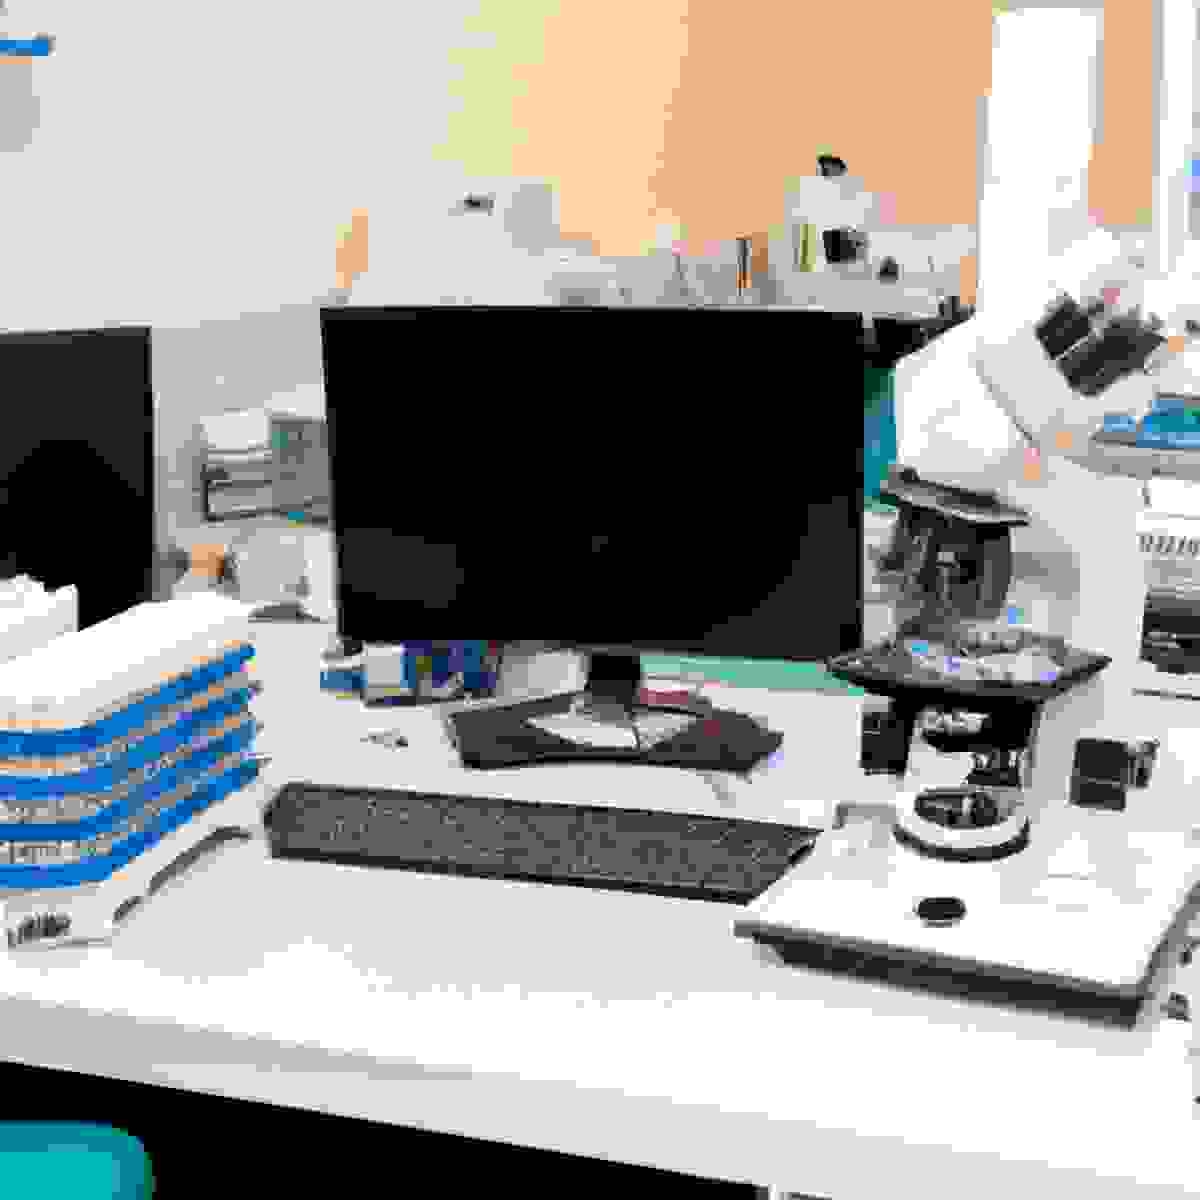 Medical lab workstation with microscope, centrifuge, computer screen displaying liver scan results, and various diagnostic tools - Congenital Hepatic Fibrosis